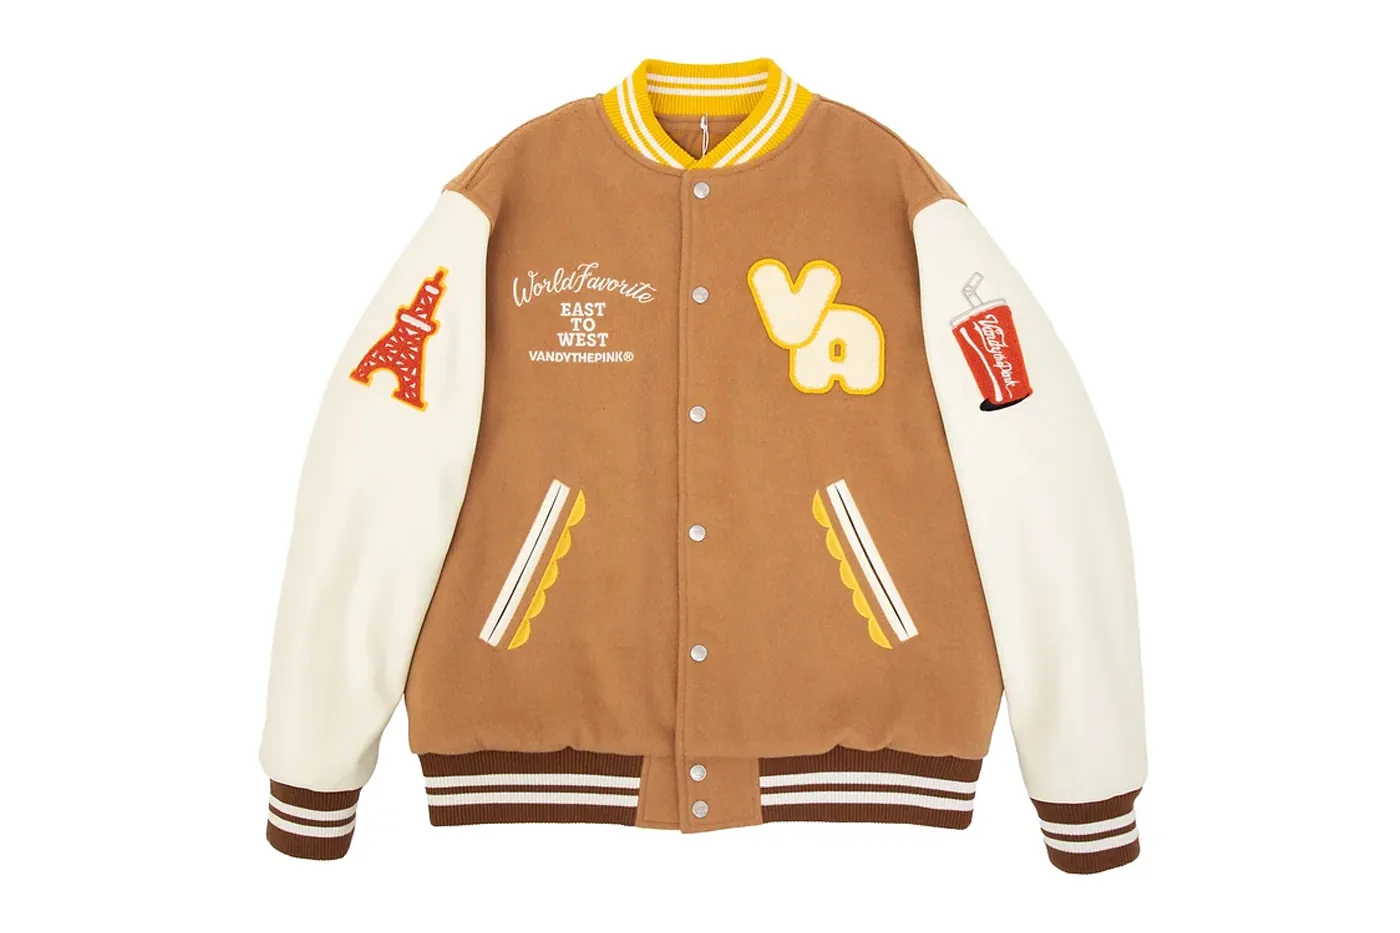 VANDY THE PINK UNVEILS SPRING COLLECTION FEAT. BURGER VARSITY